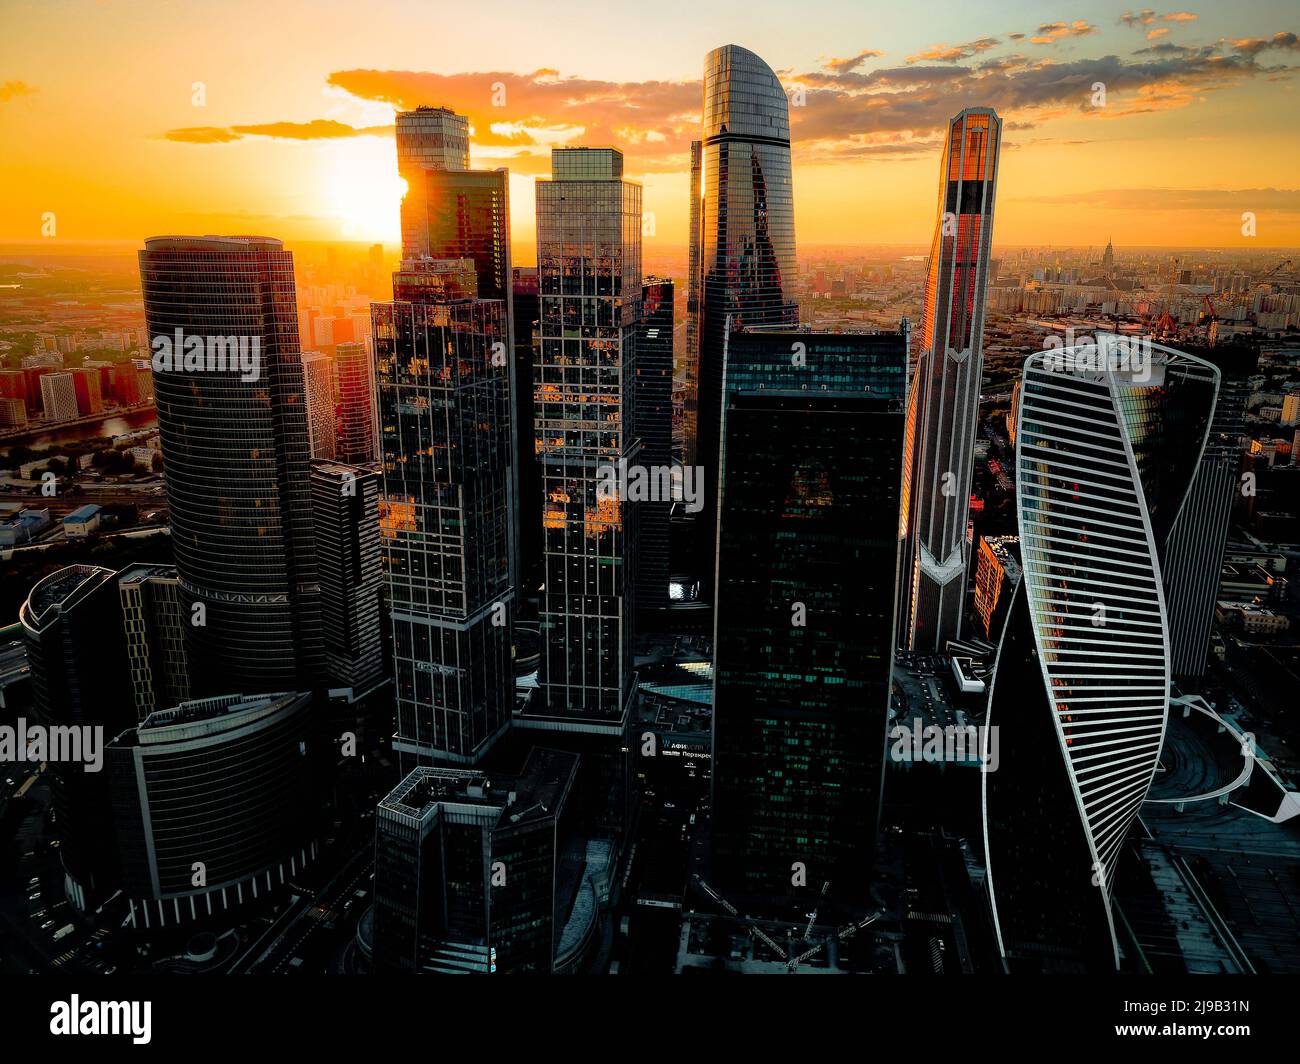 Skyscrapers of Moscow City business centre at sunset. Aerial view of Moscow city skyline and skyscraper building Stock Photo